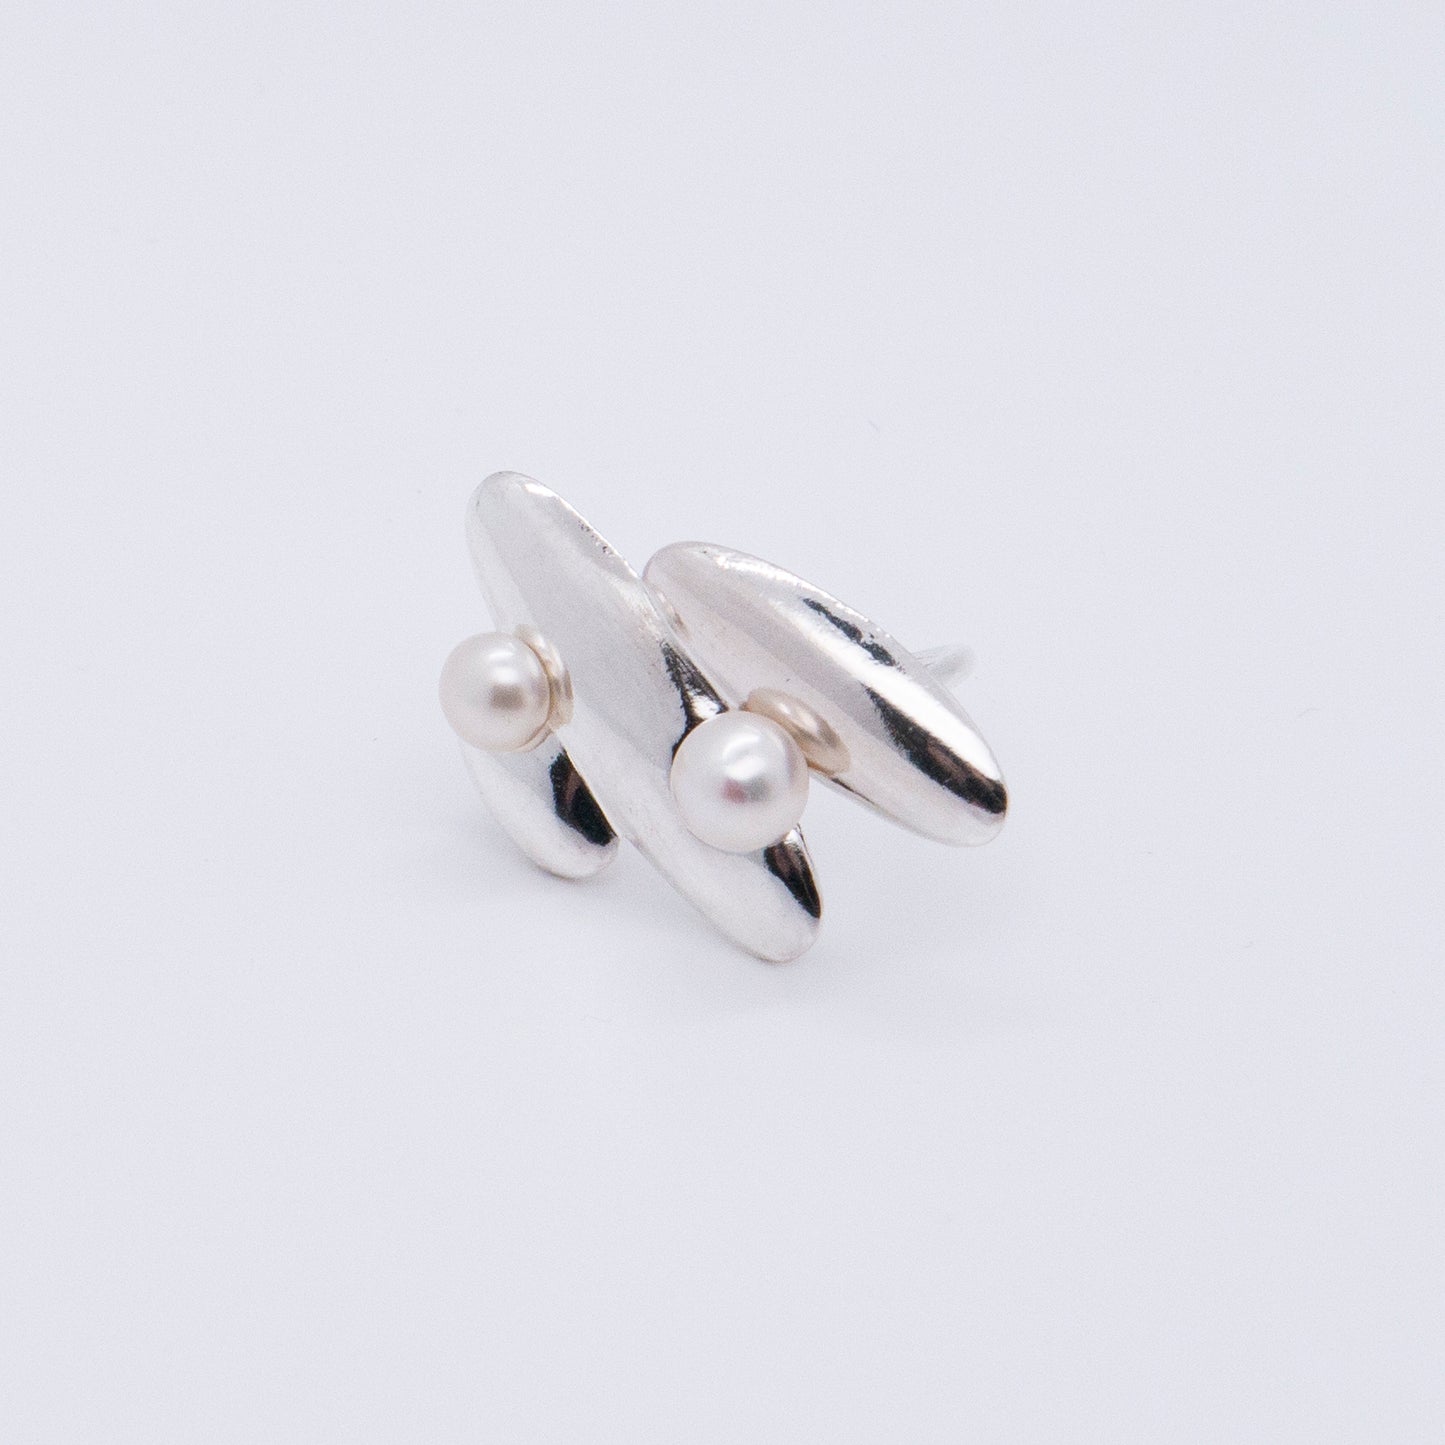 Multiverse - Parallel Universes Pearl Ring (Silver)